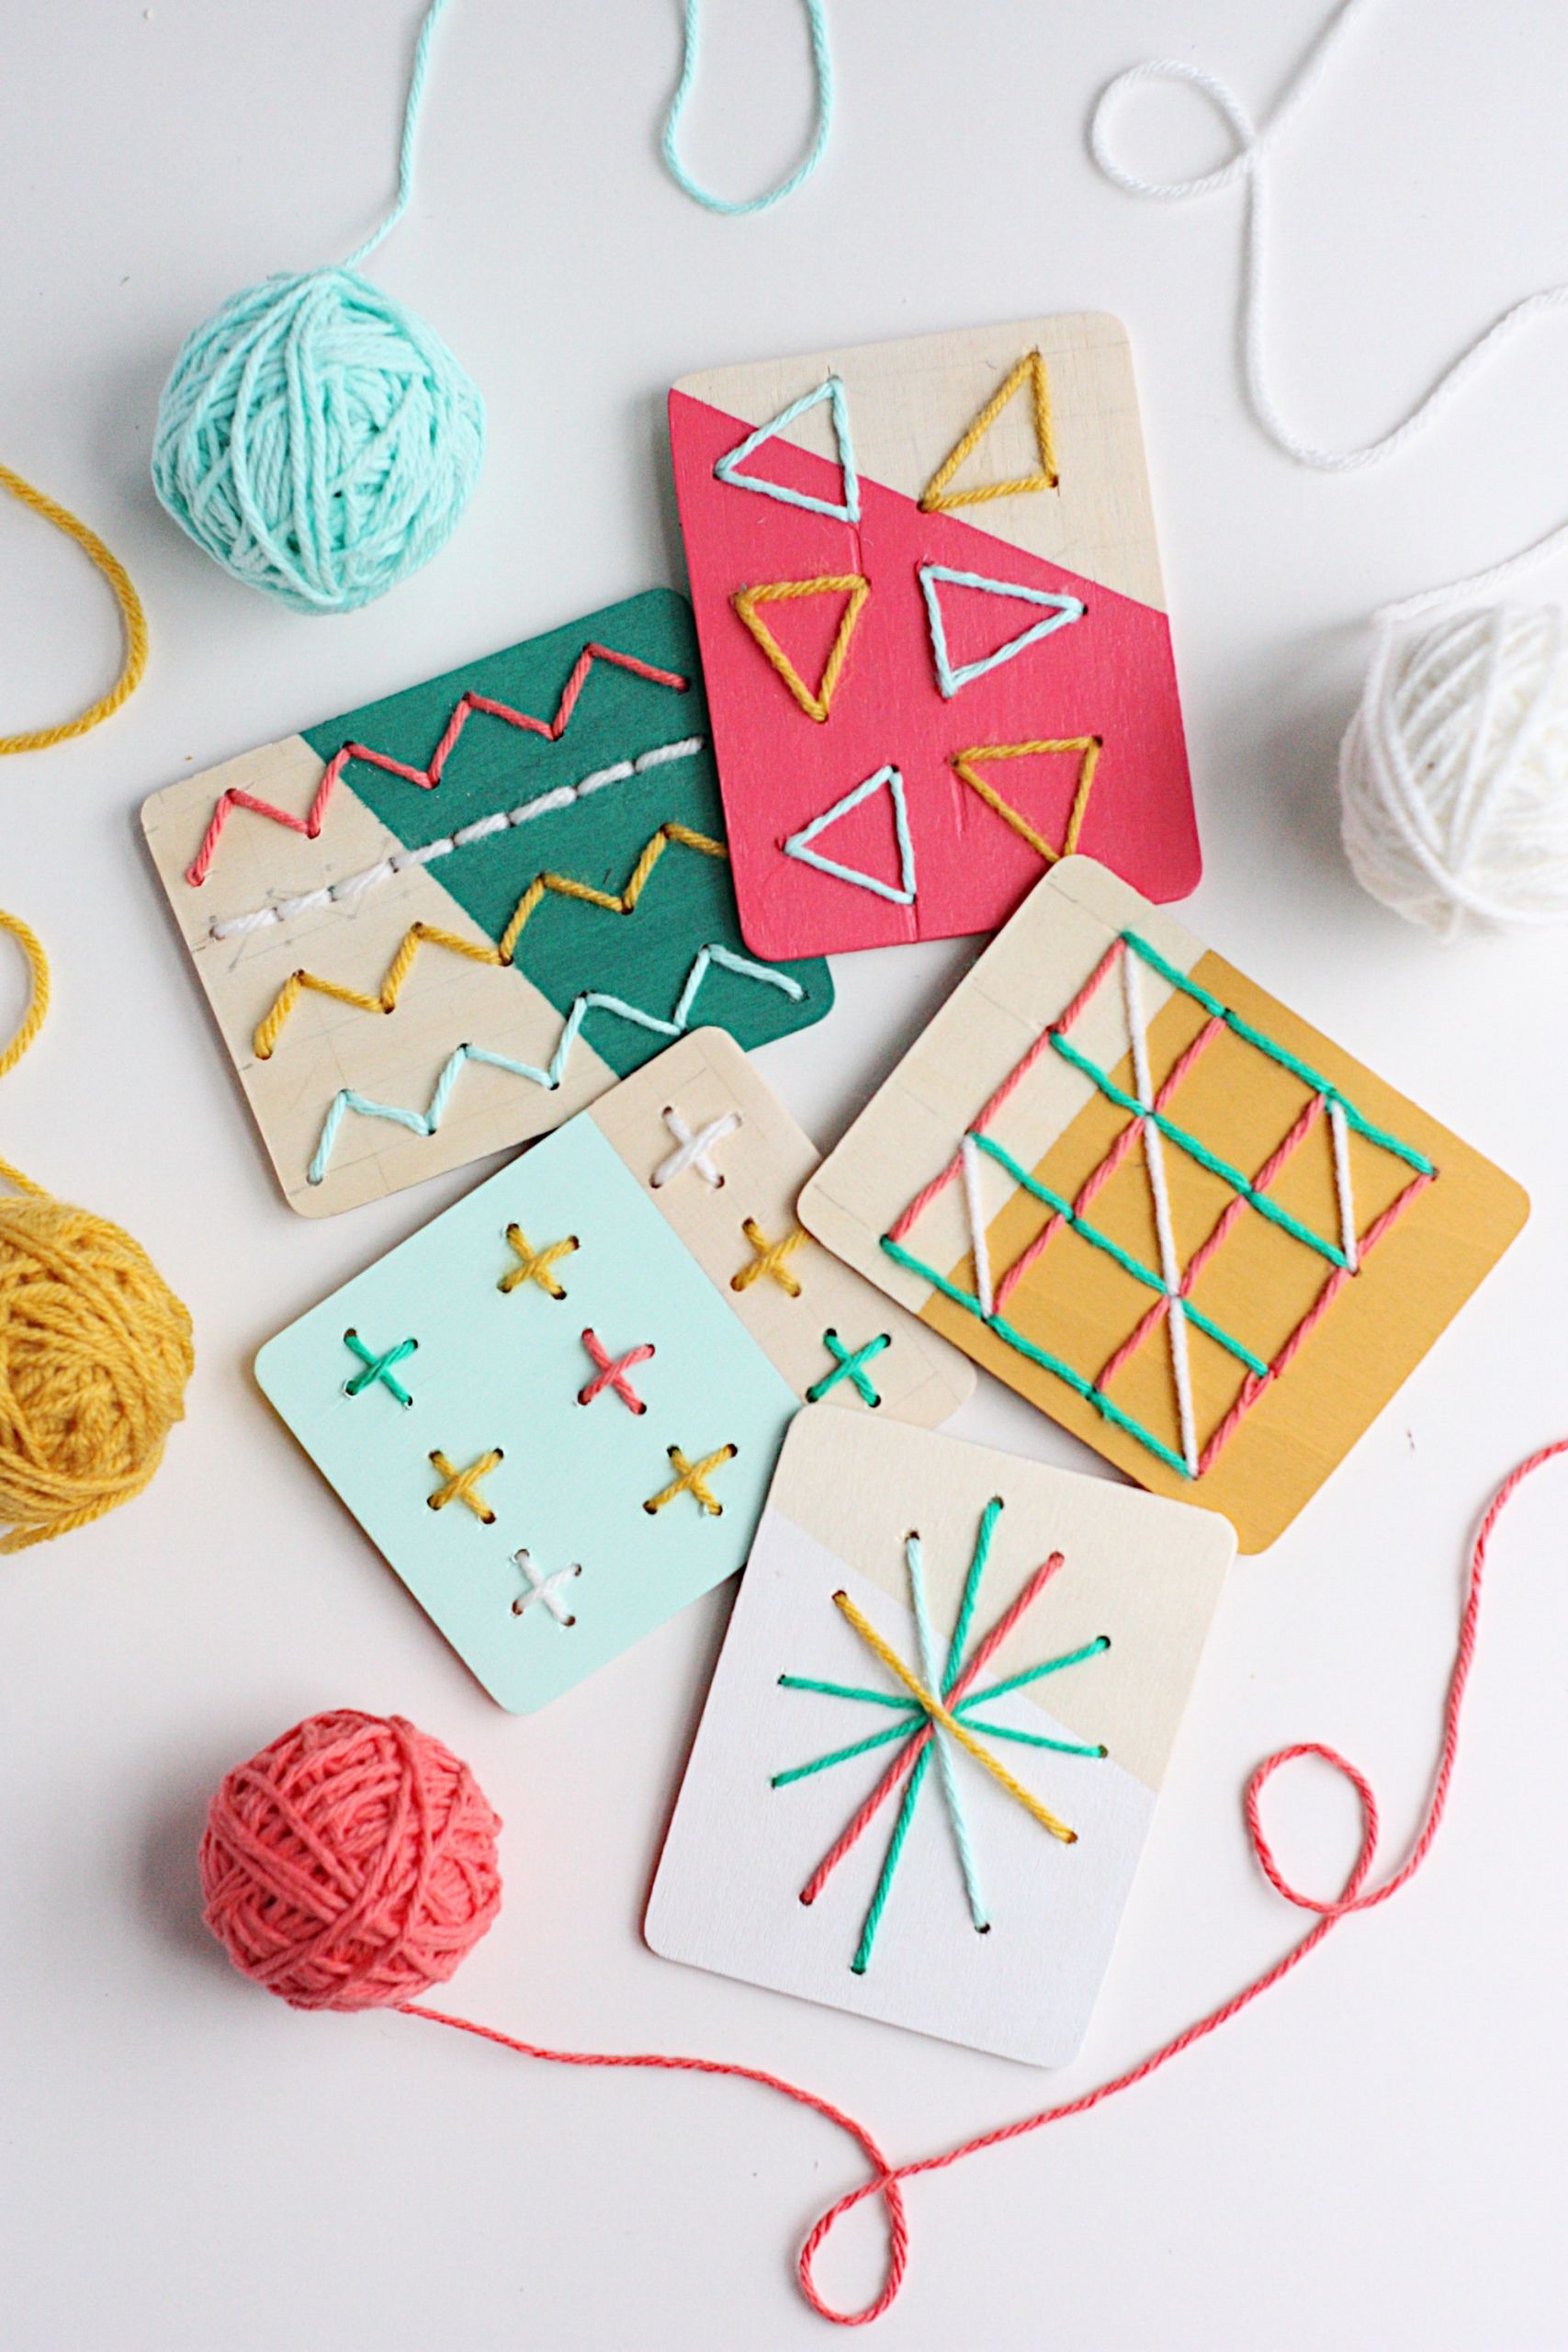 DIY Activities For Toddlers
 11 DIY Yarn Crafts That Will Amaze Your Kids Shelterness